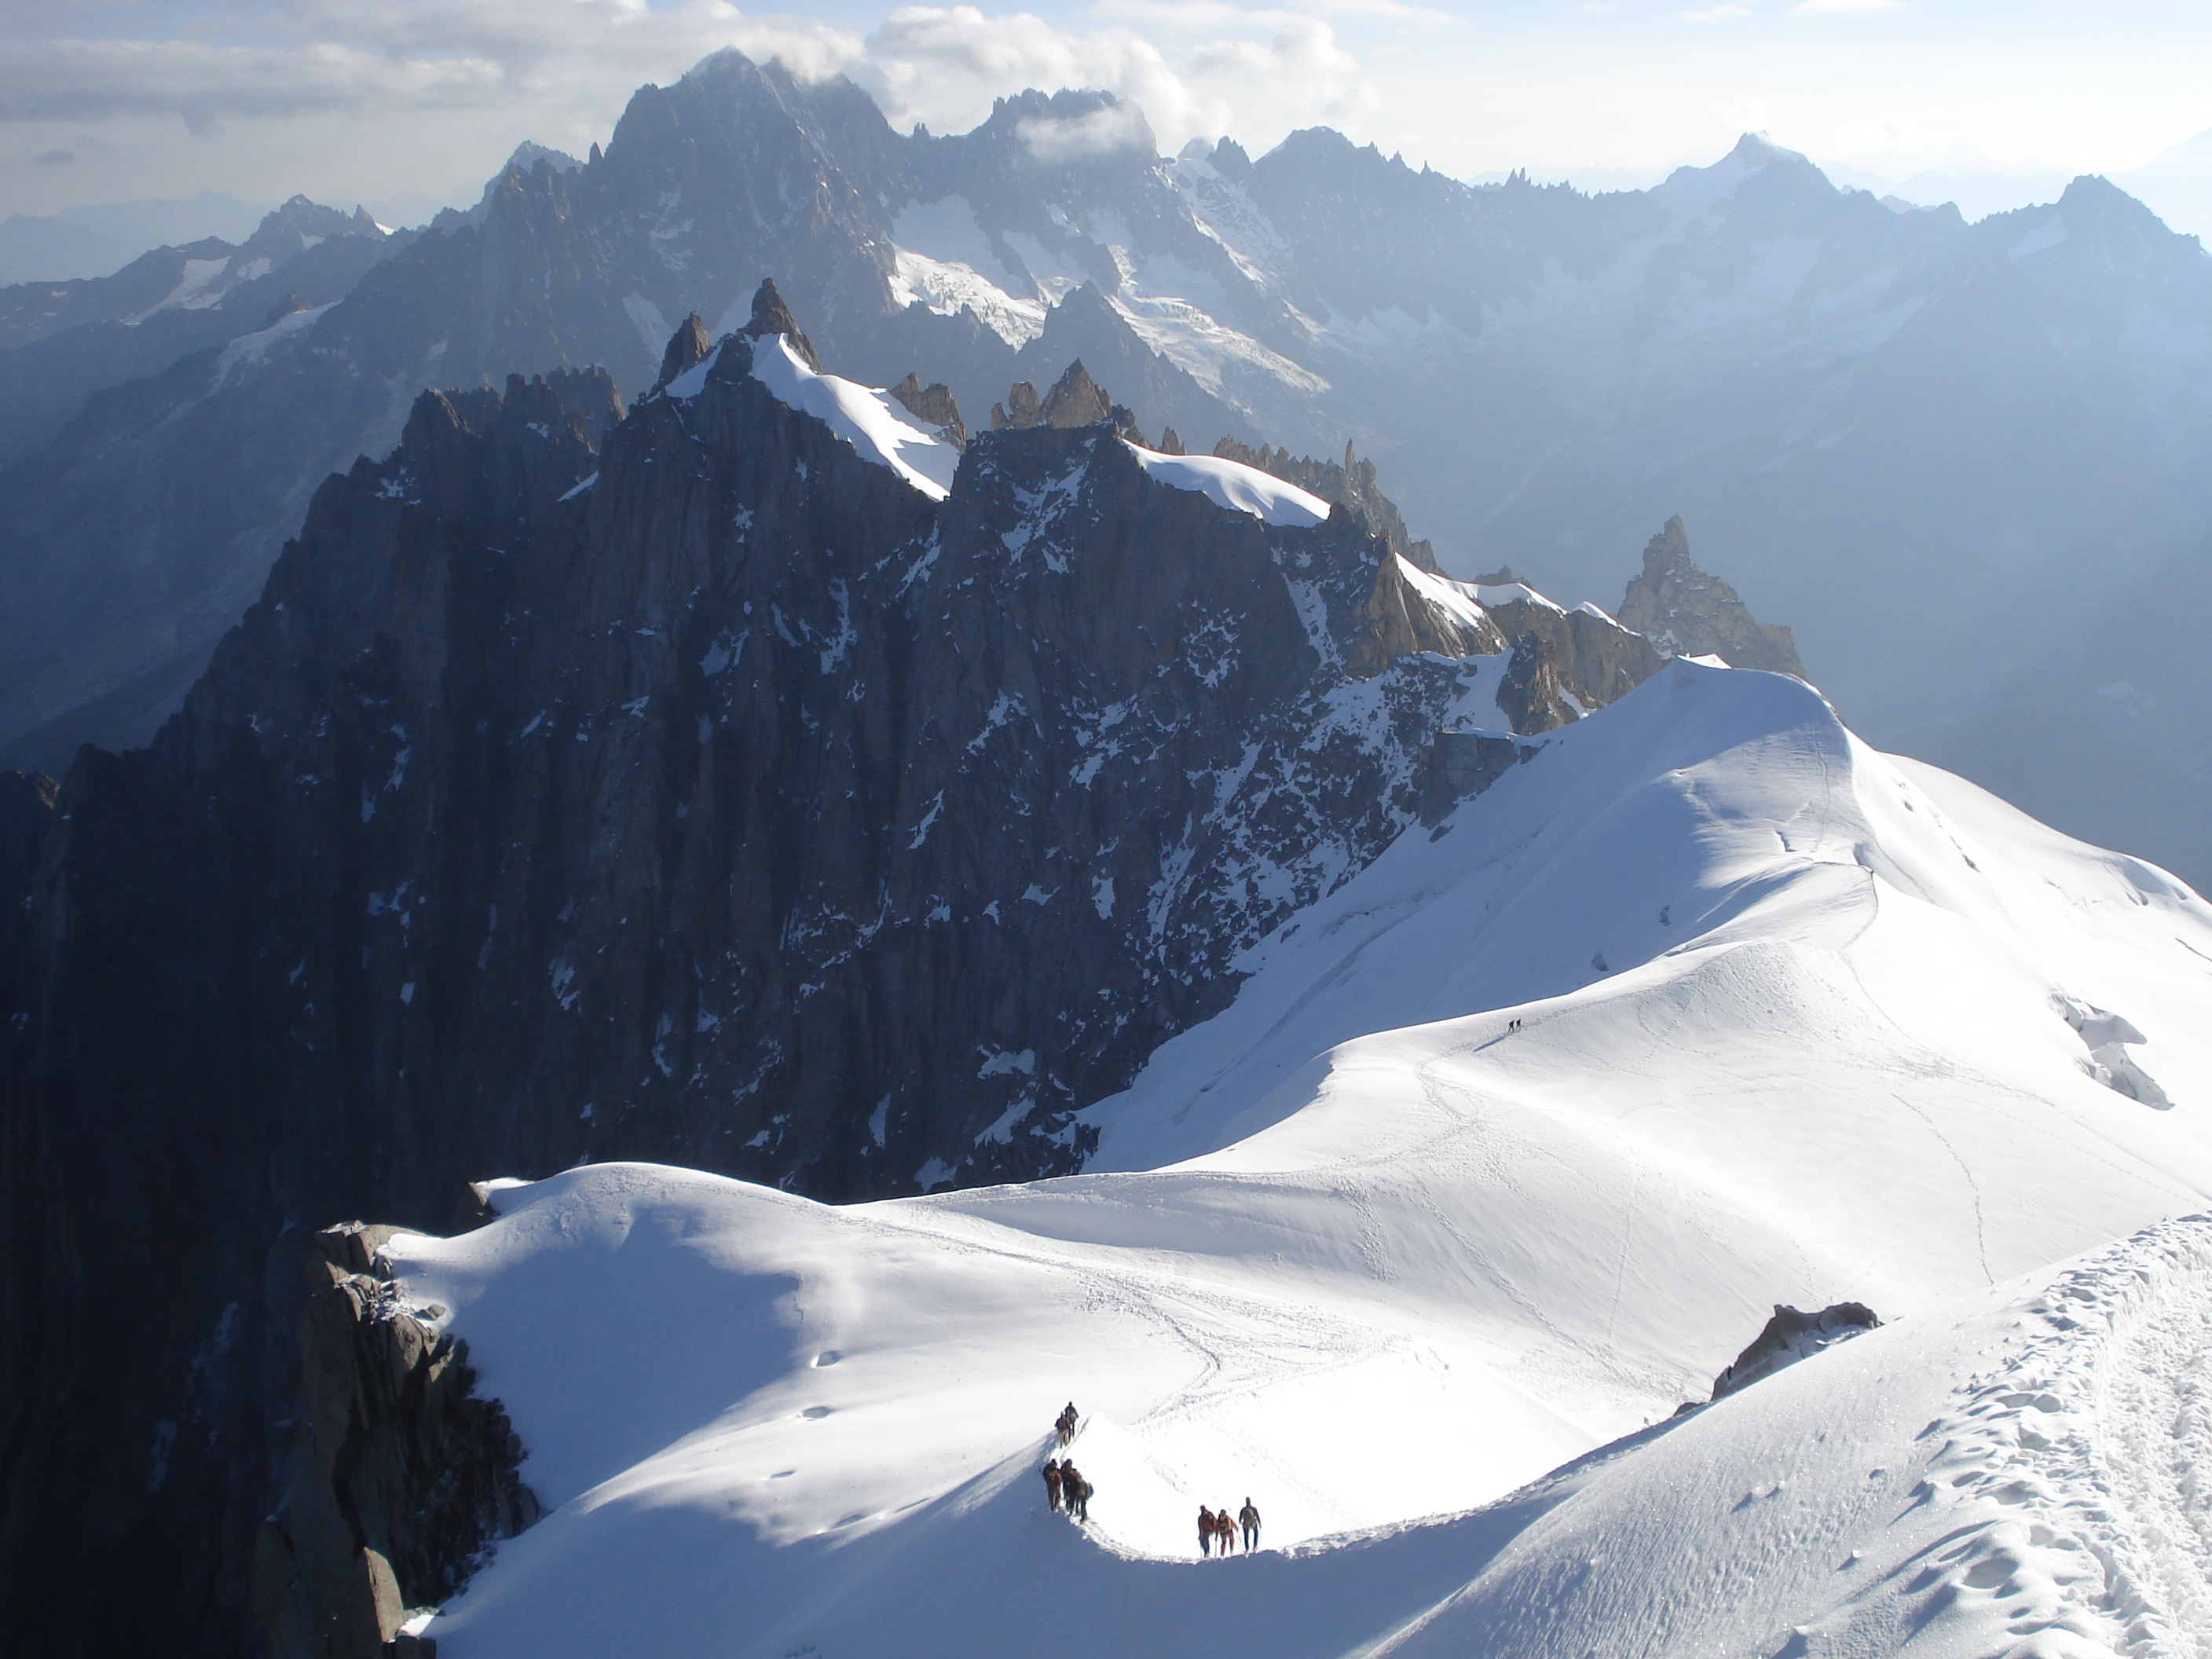 The ridge from the lift on Aiguille du Midi.     Photo: Andreas Bengtsson